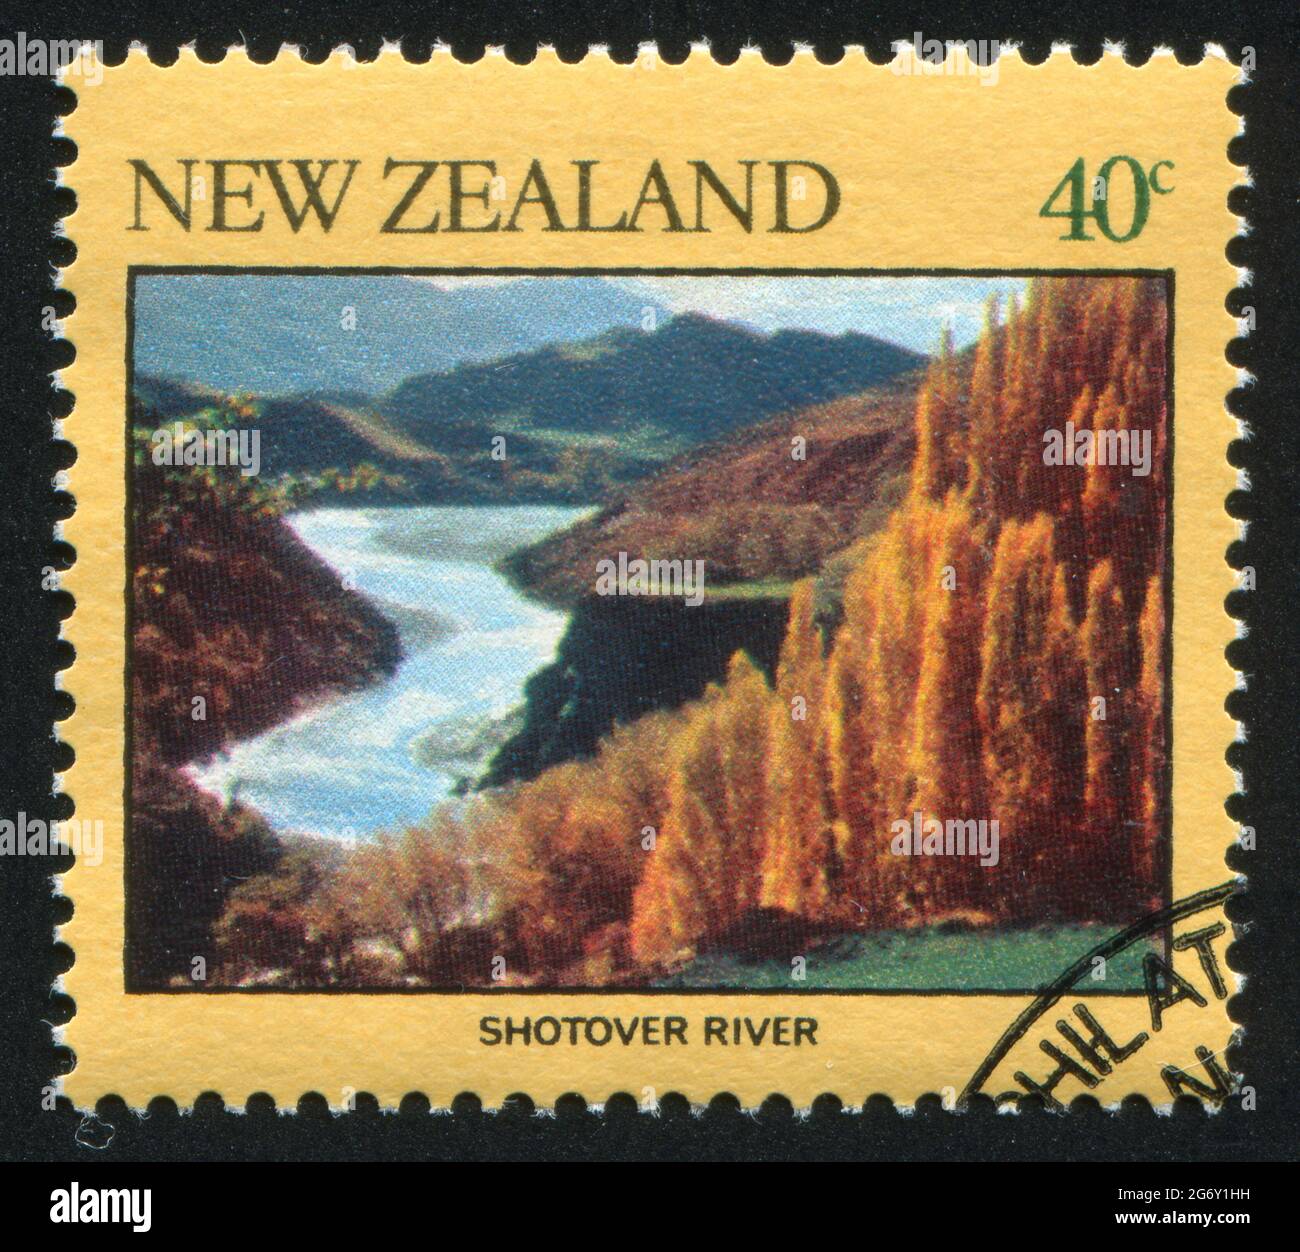 Shotover Jet Boat Shotover River Queenstown New Zealand Picture by Barry  Bland 9 12 03 Stock Photo - Alamy